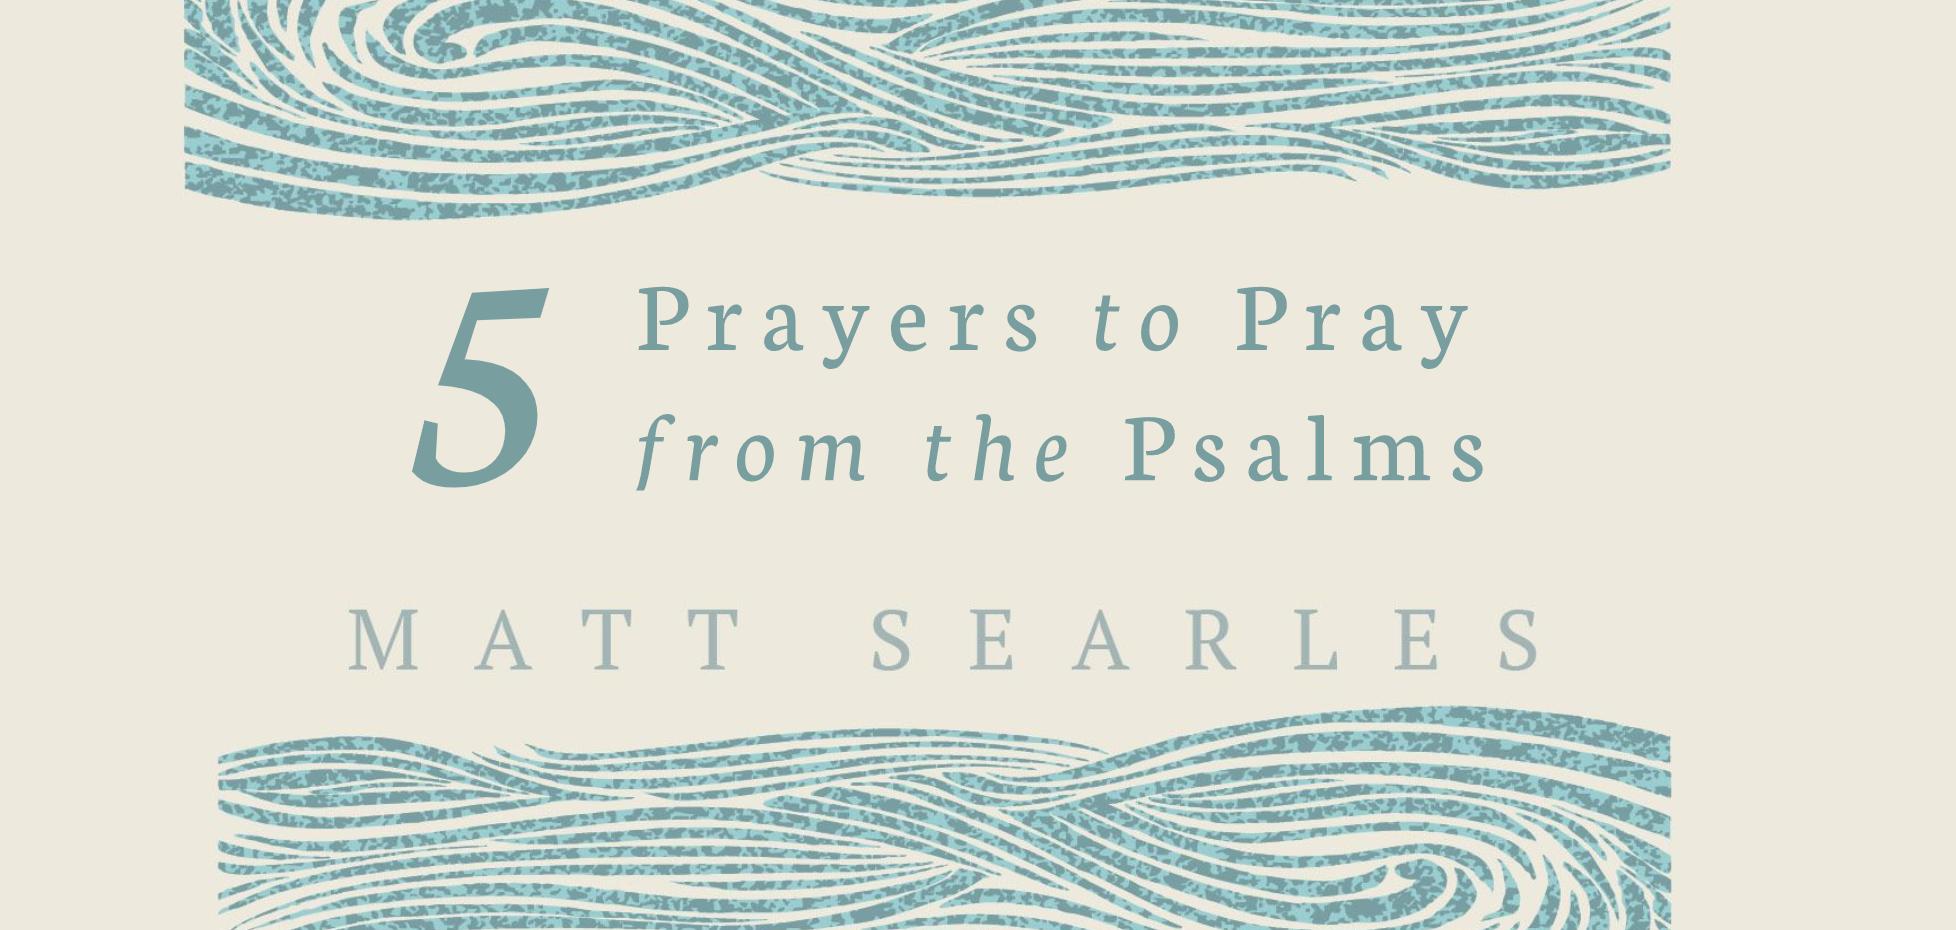 5 Prayers to Pray from the Psalms